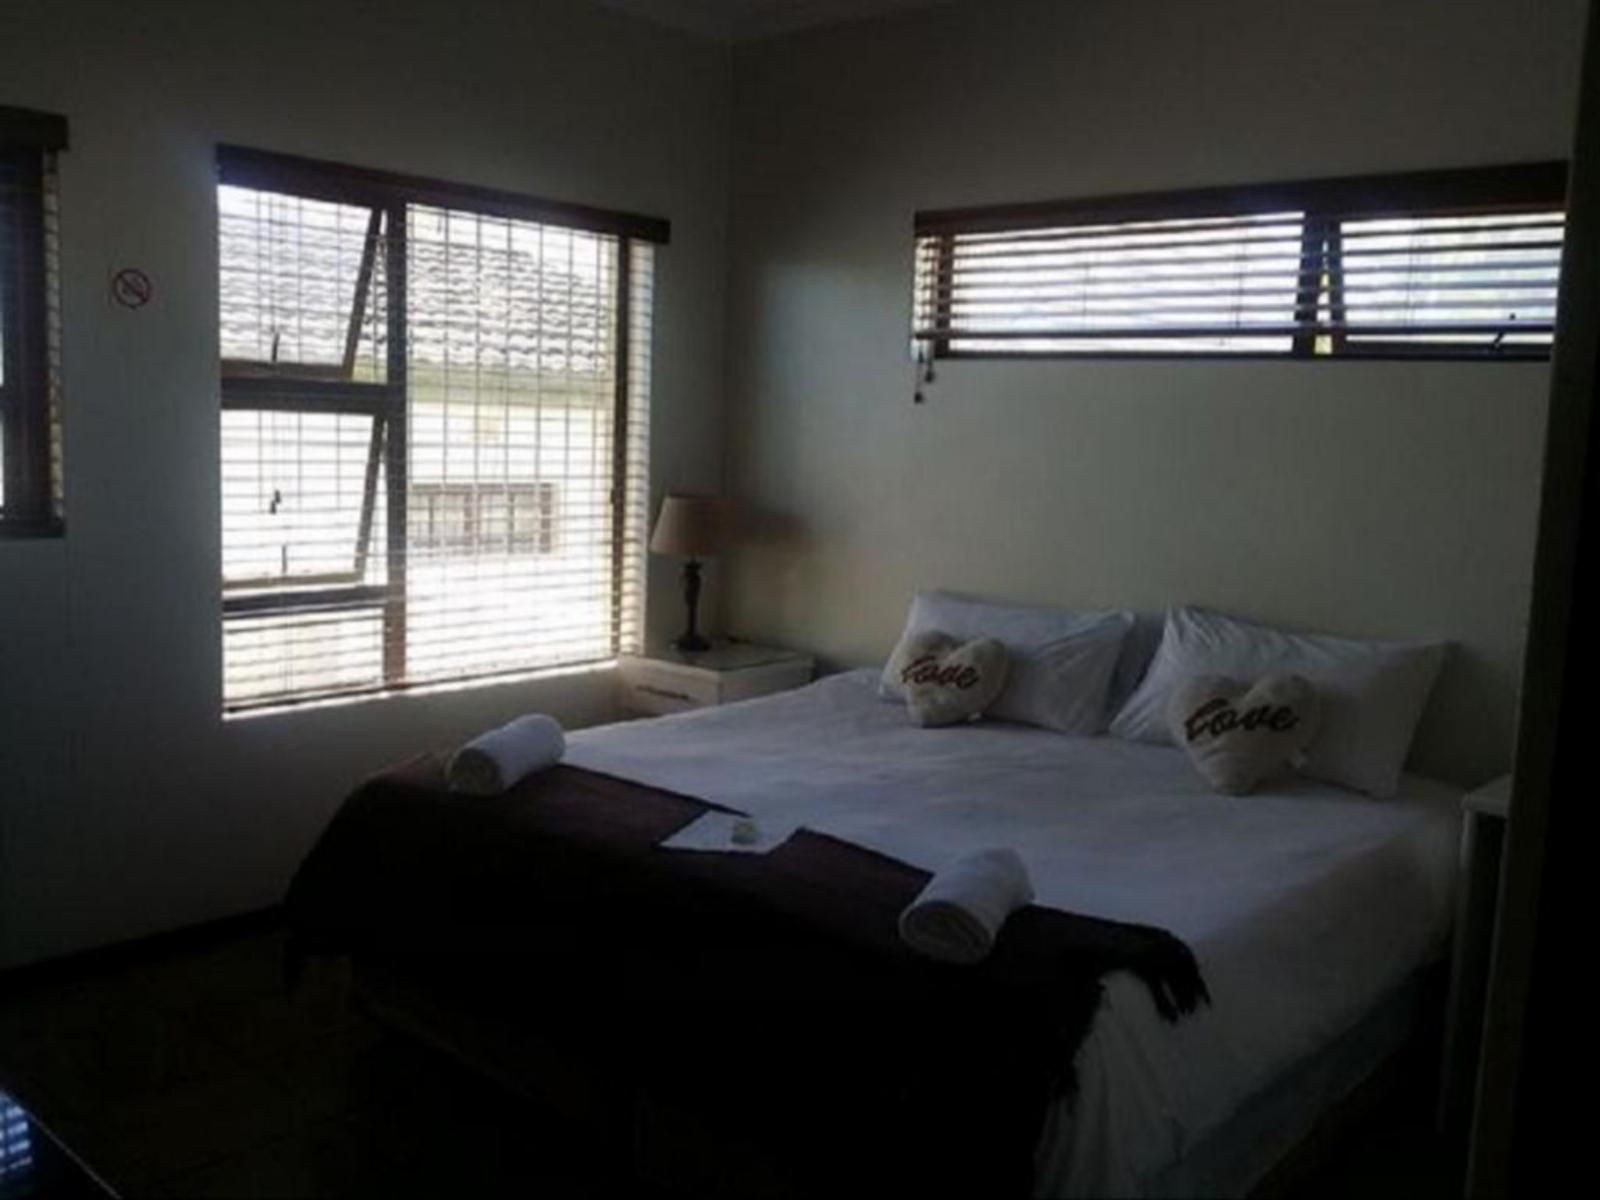 12 On Beach Guest House Saldanha Western Cape South Africa Unsaturated, Window, Architecture, Bedroom